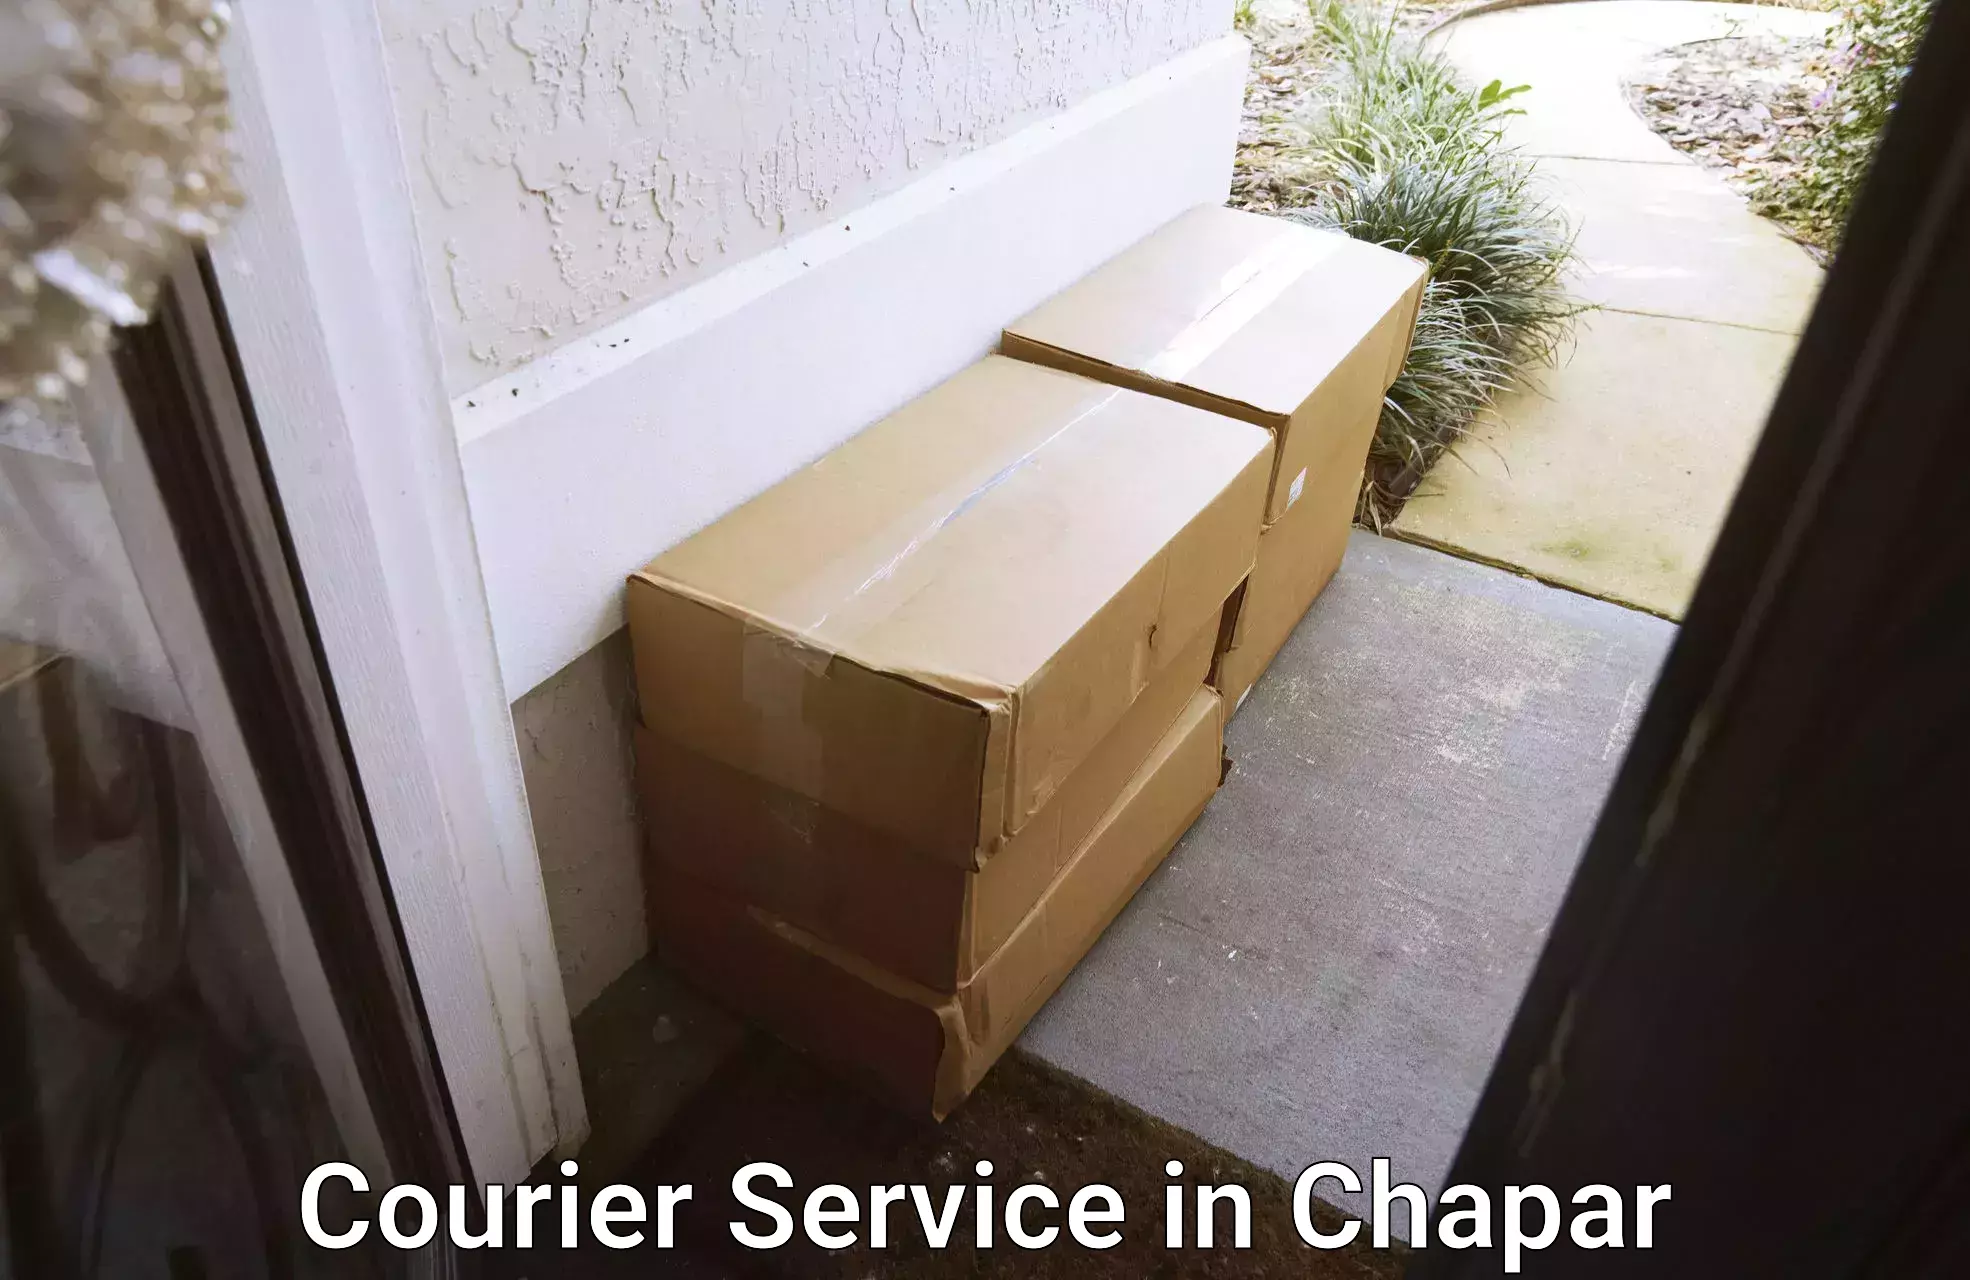 Online package tracking in Chapar